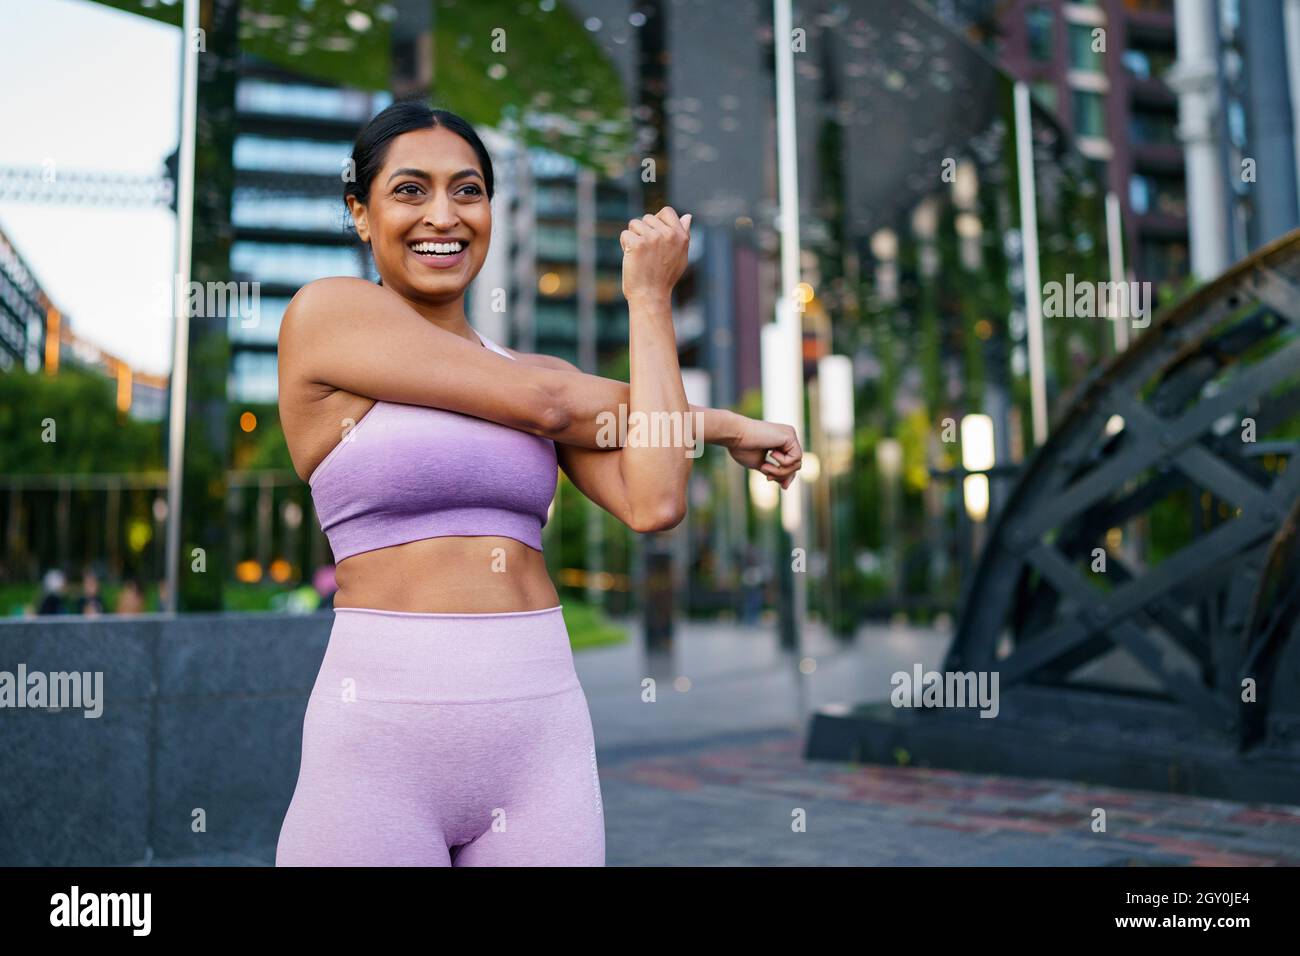 Woman in a pink outfit stretching before a workout in an urban setting Stock Photo